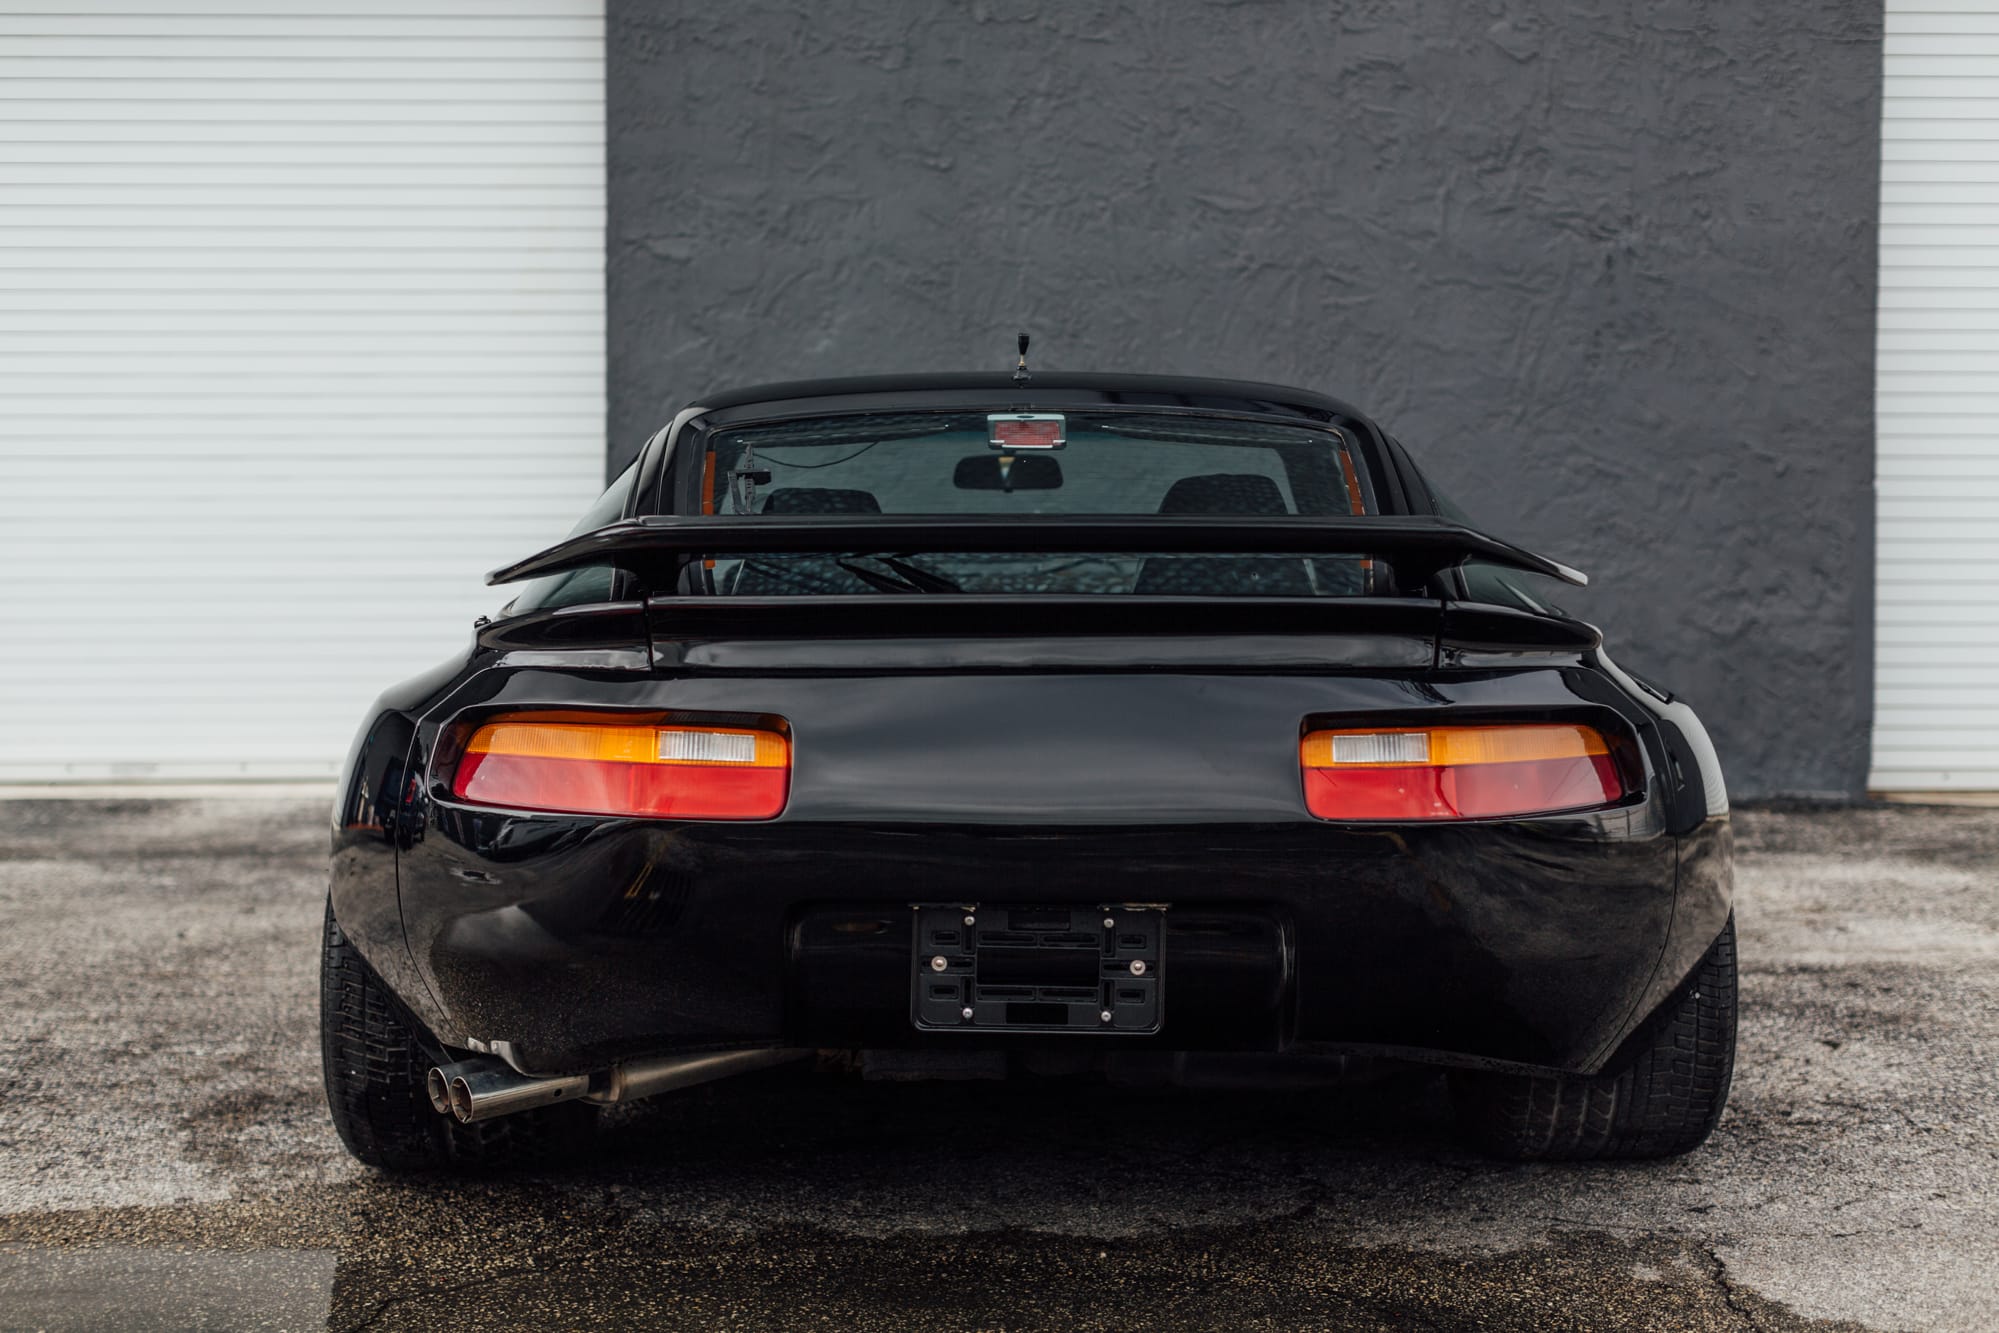 1984 Porsche 928S by Koenig Specials | BBS RS | Period Correct | Time Capsule – an 80s Icon